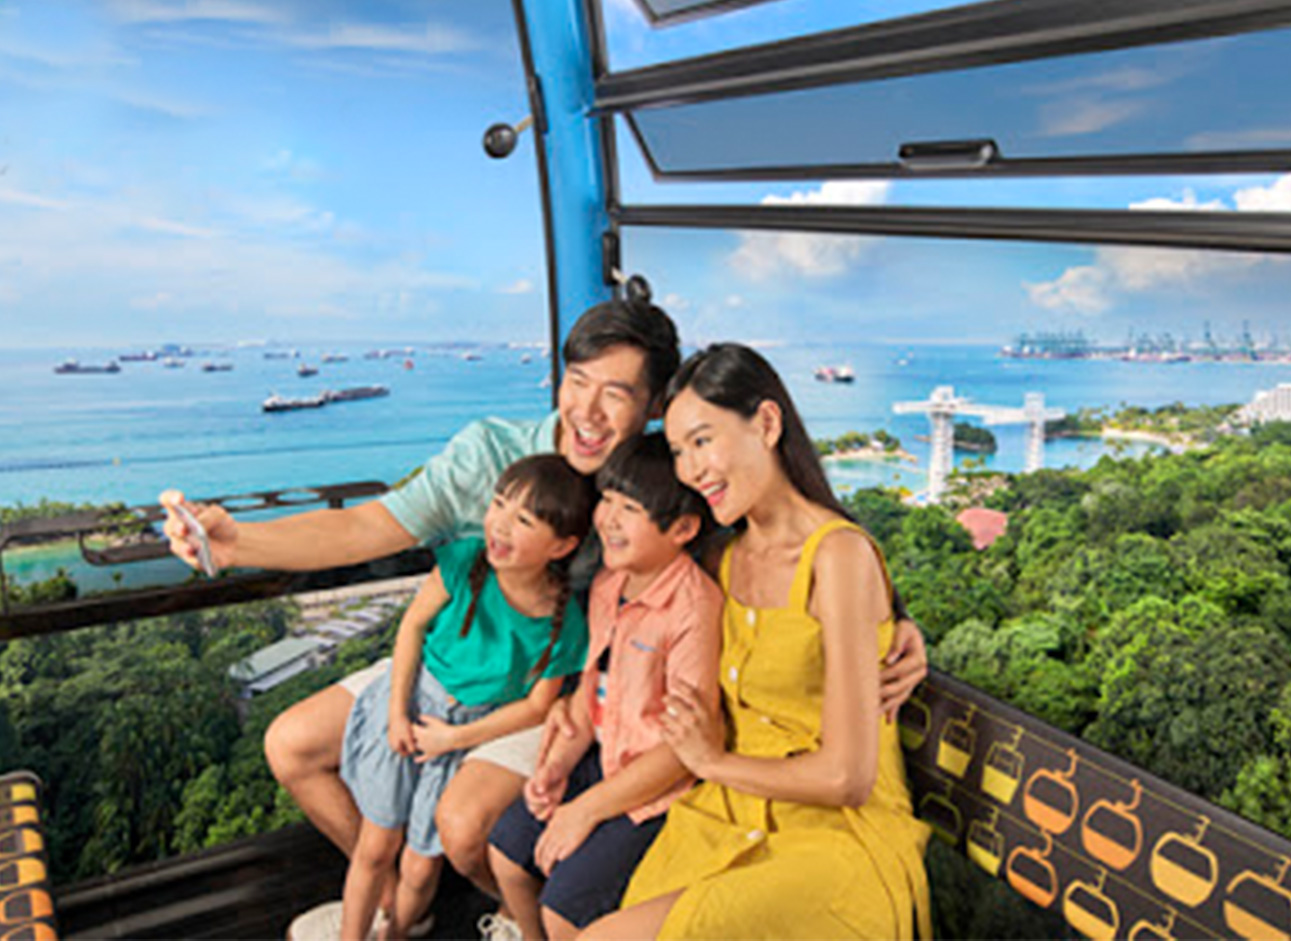 Ropeway Cable Car - Scenic views and convenient transportation